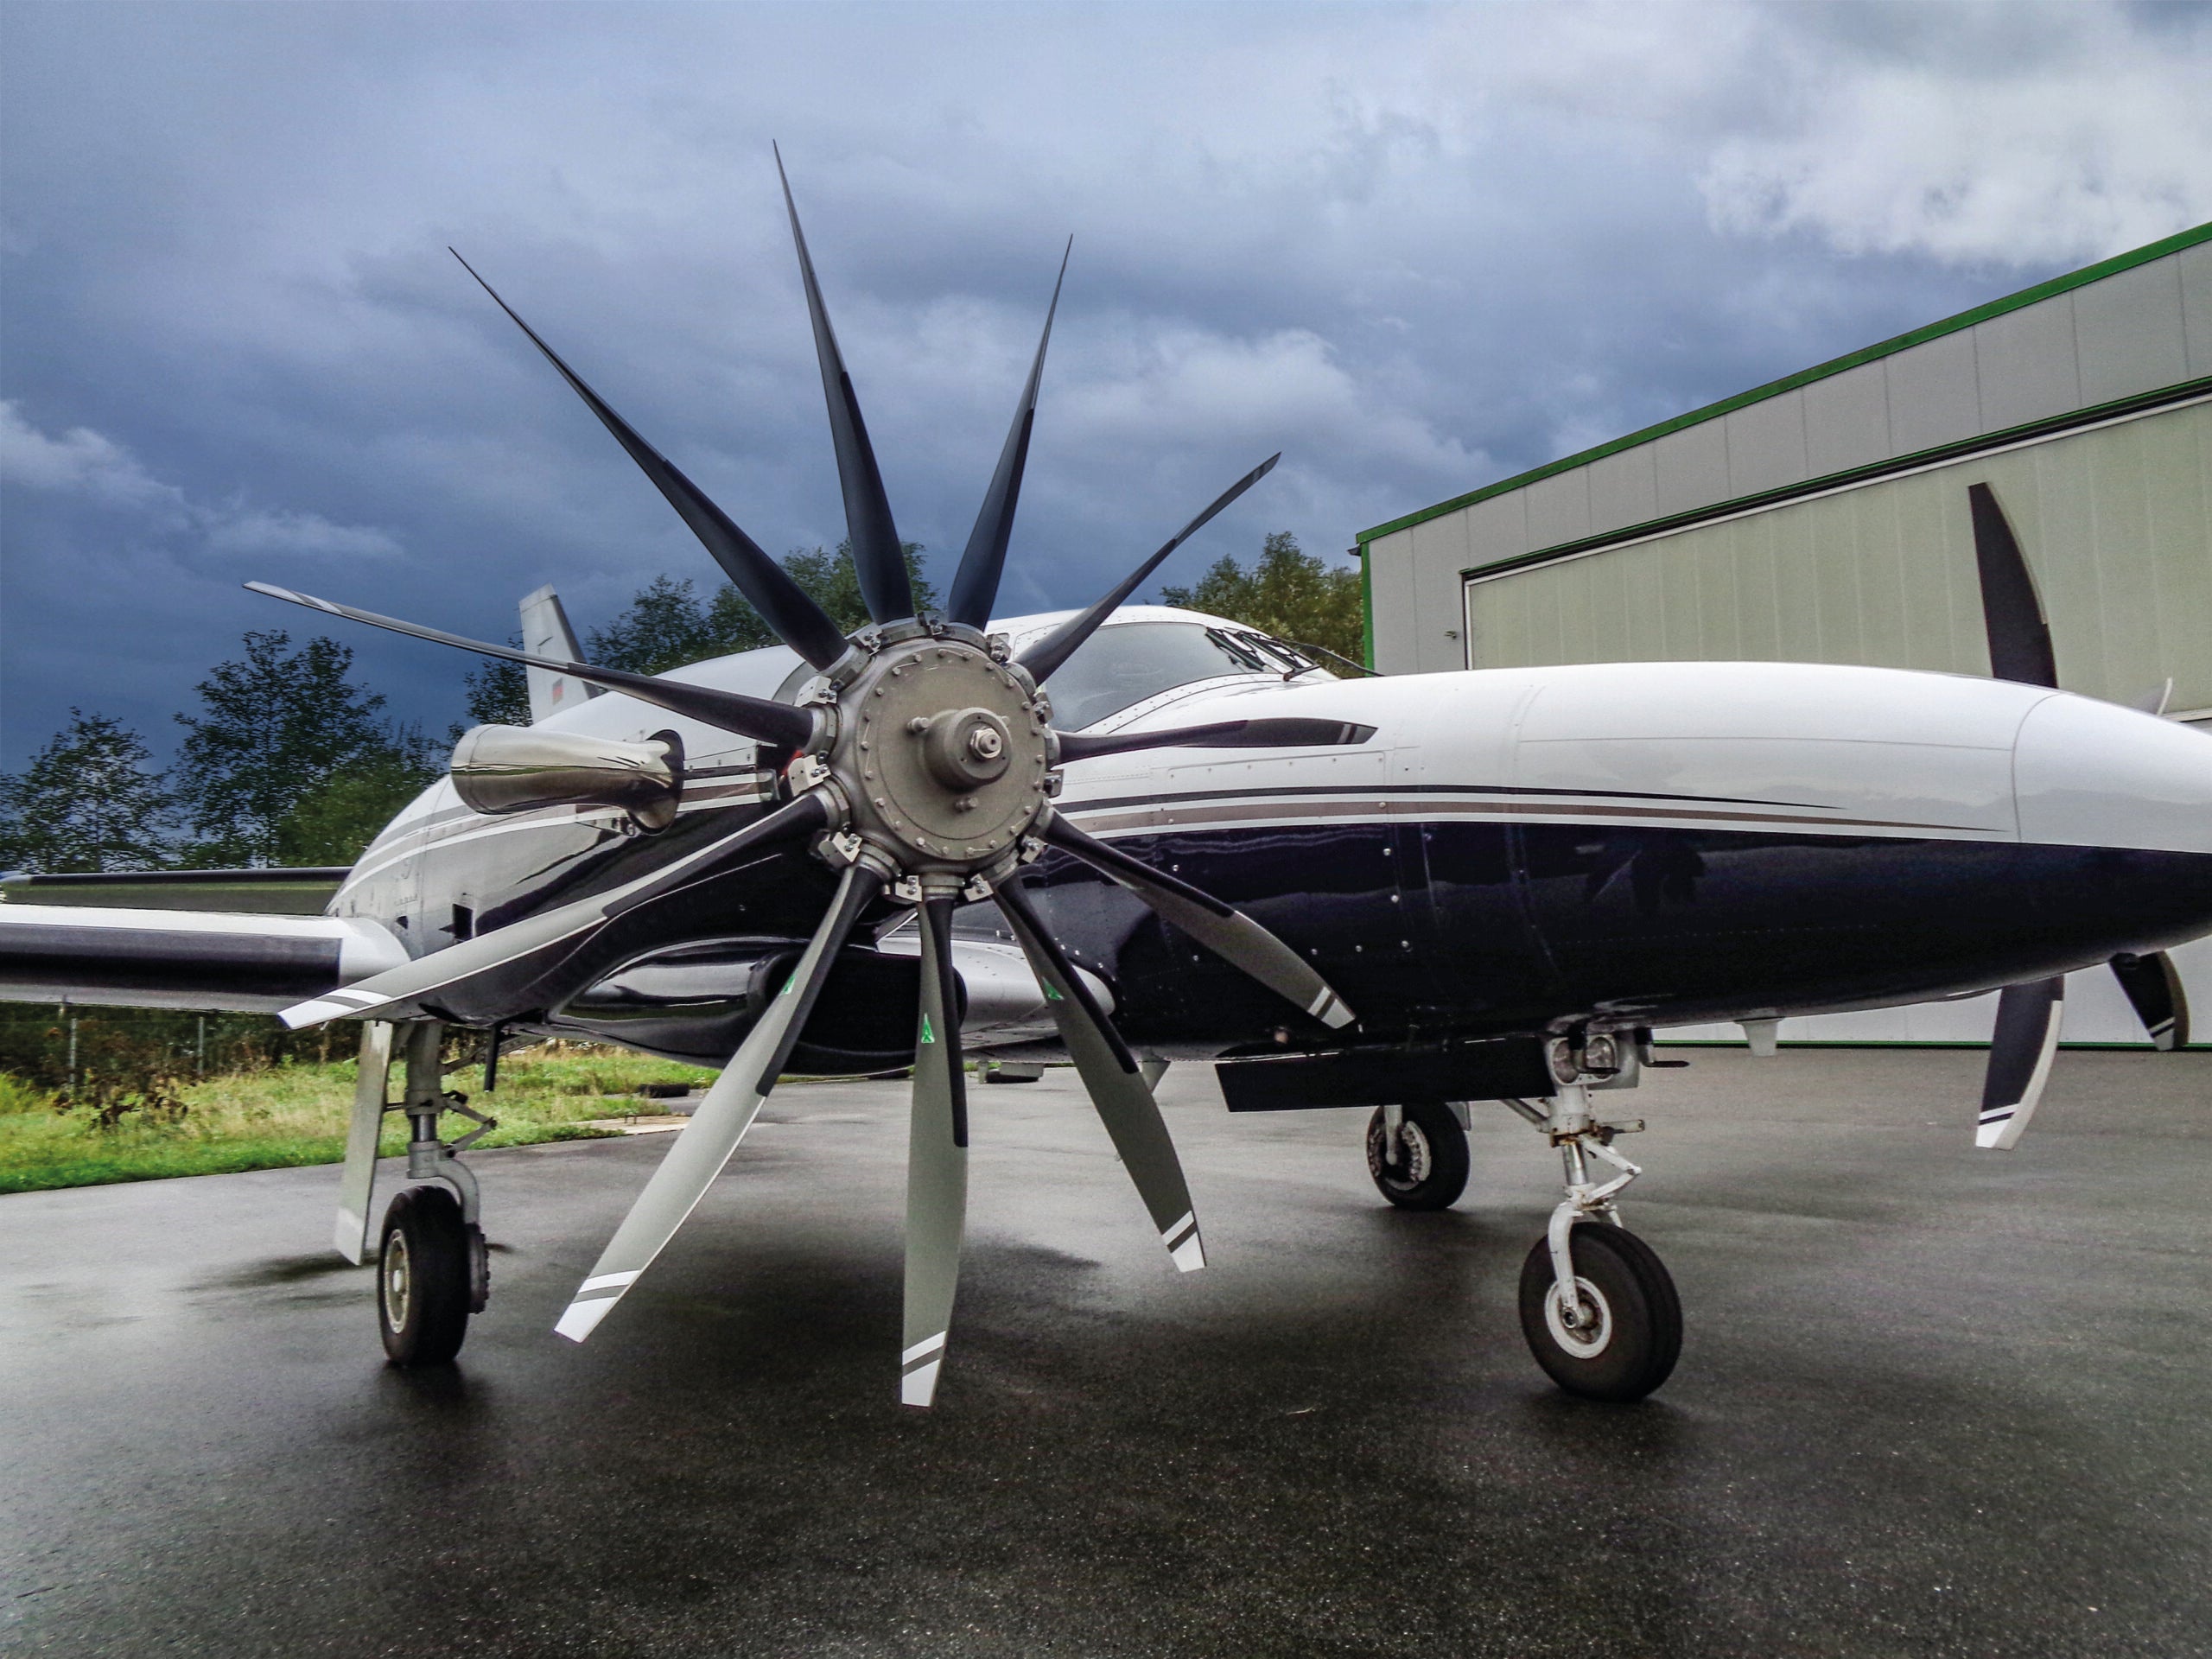 MT Flight-Tests Propeller With 11 Blades On A Piper Cheyenne